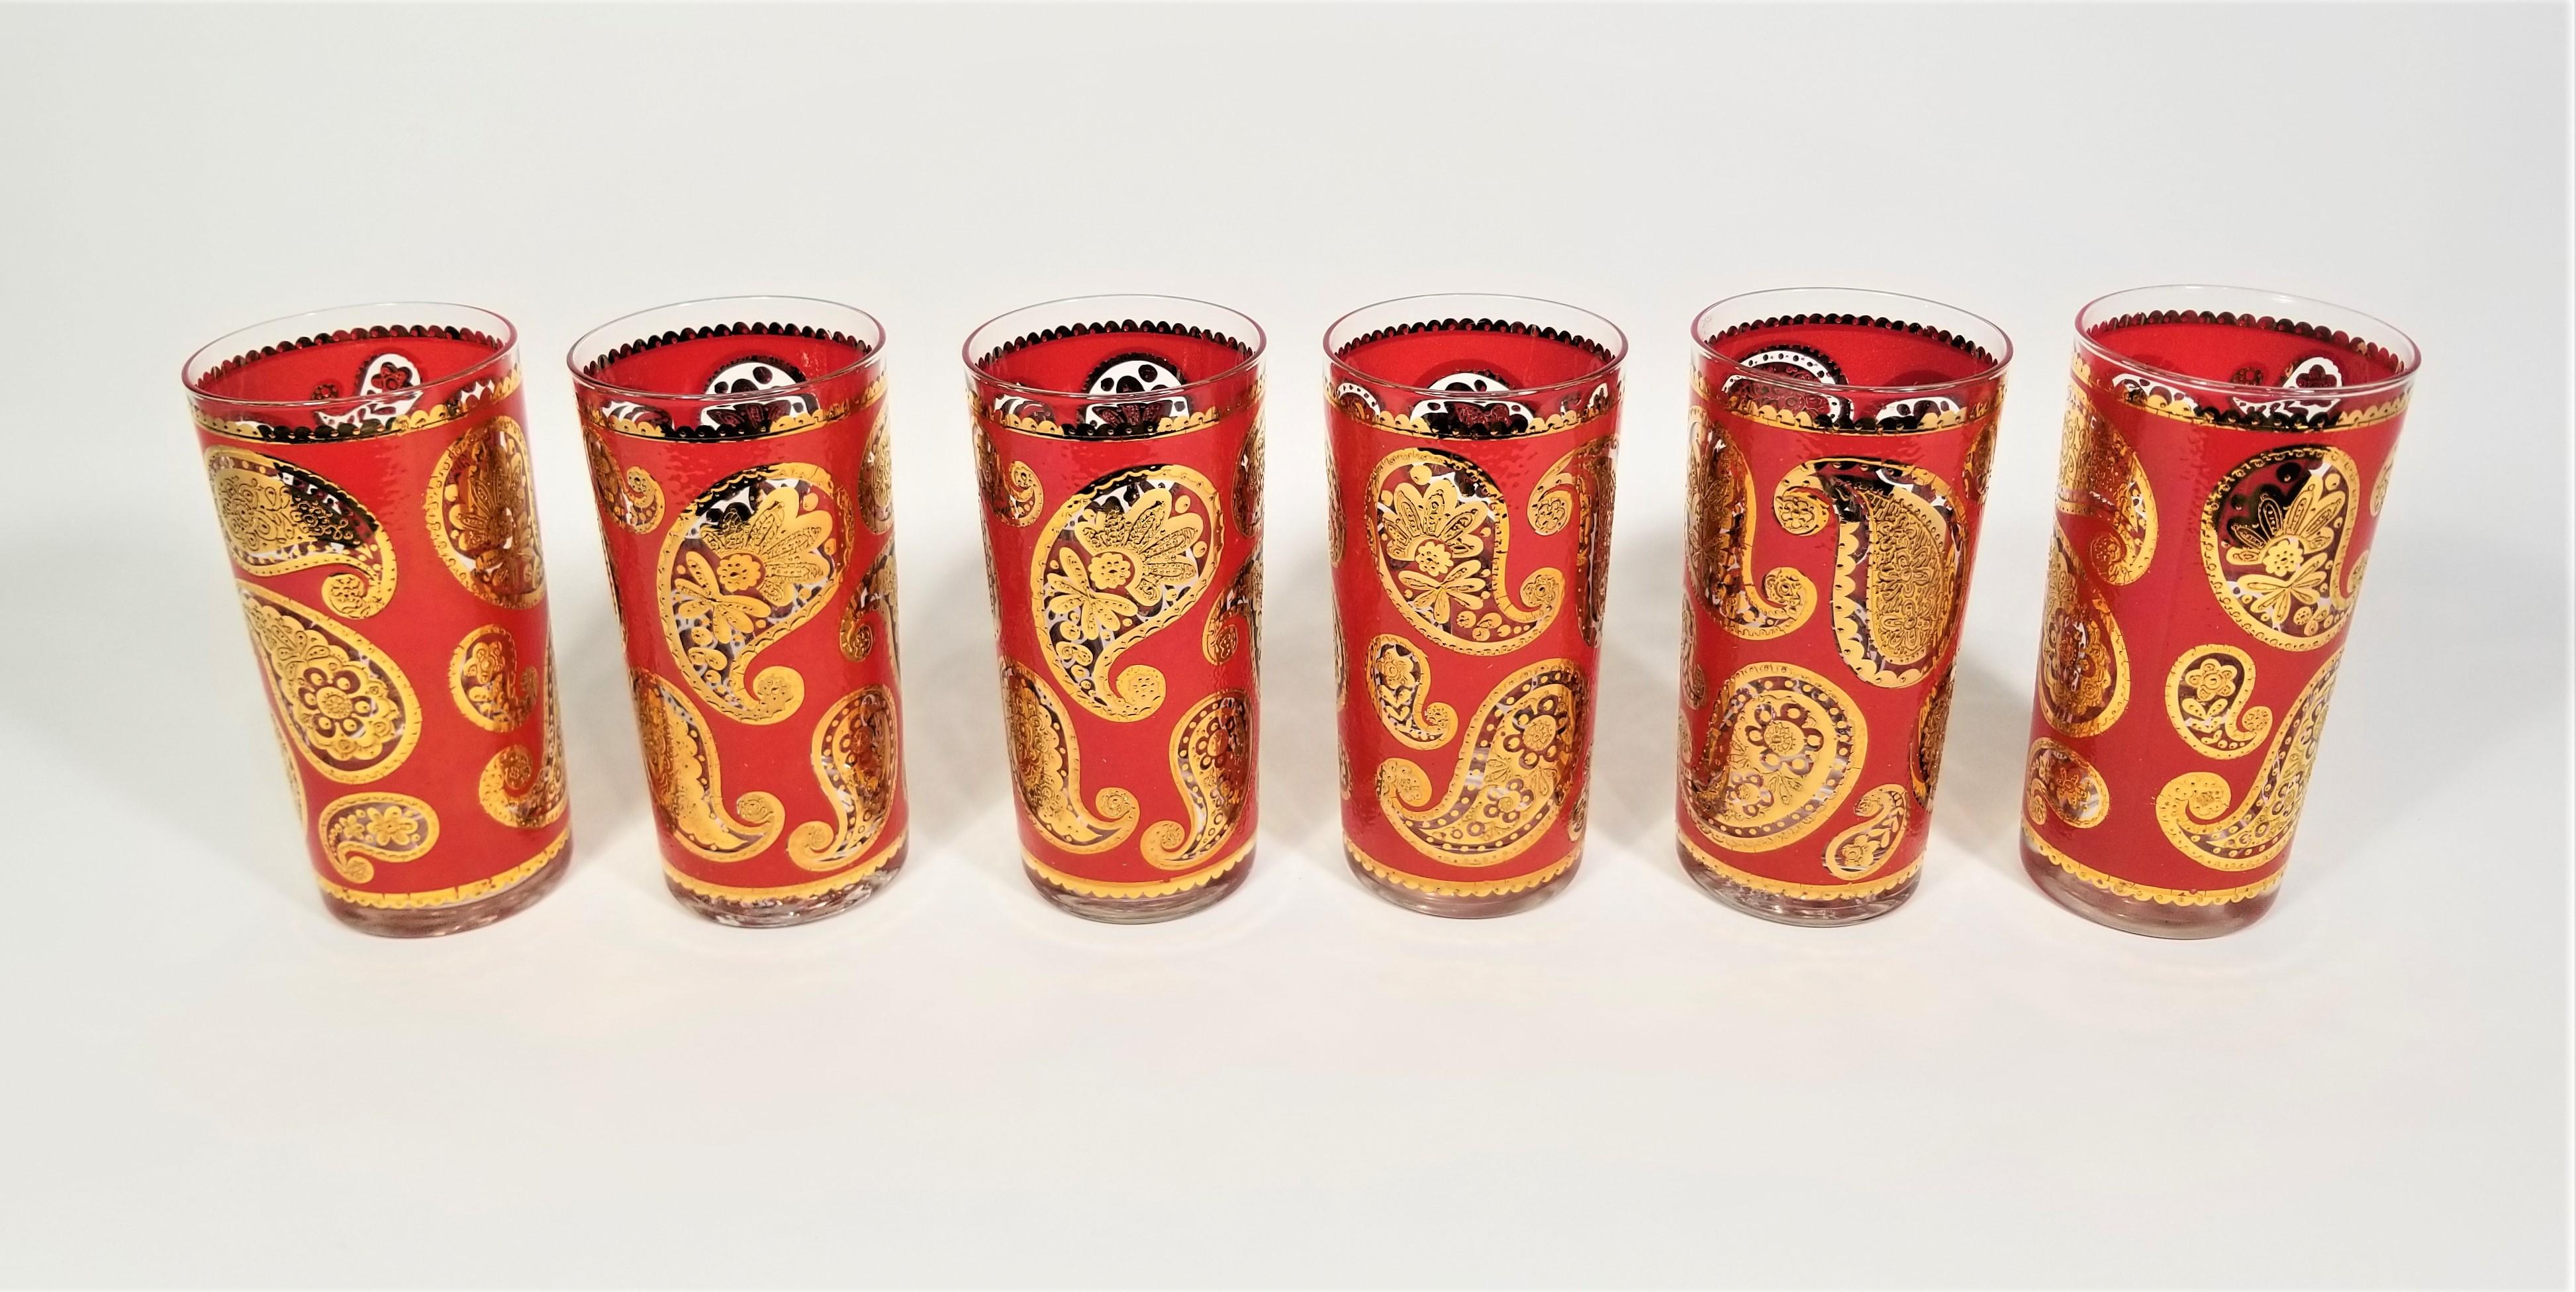 1960s mid century culver 22k gold and red. paisley design. Set of 6.:
 Excellent condition.